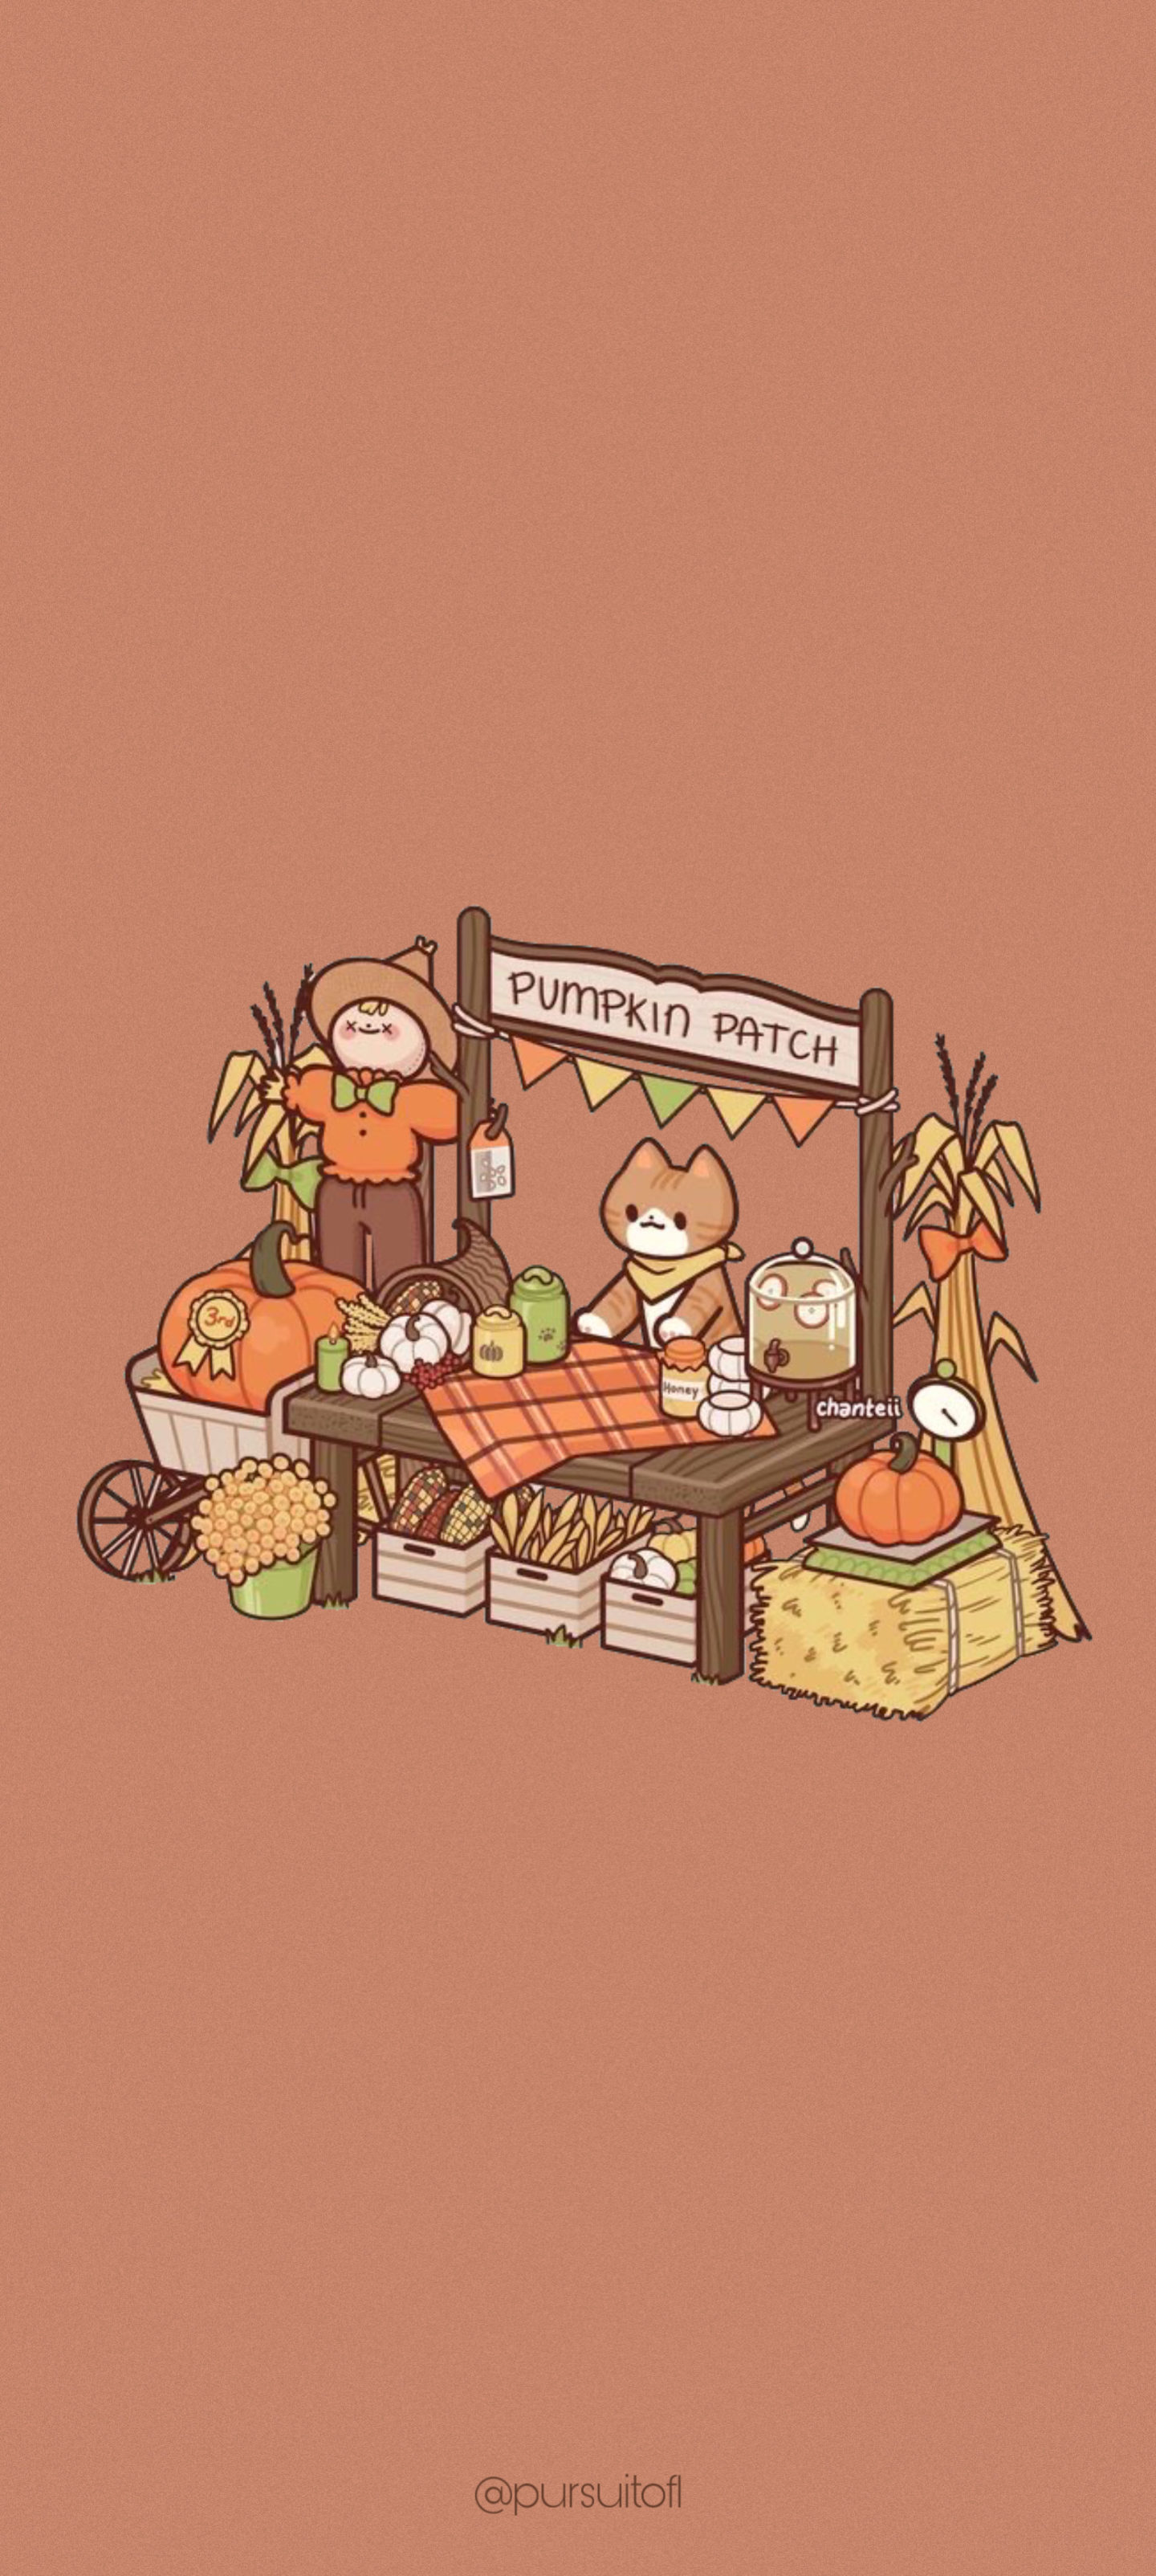 Brown Phone wallpaper with illustration of kitten at a fall pumpkin patch stand with scarecrow, pumpkins, apple cider, corn, and hay